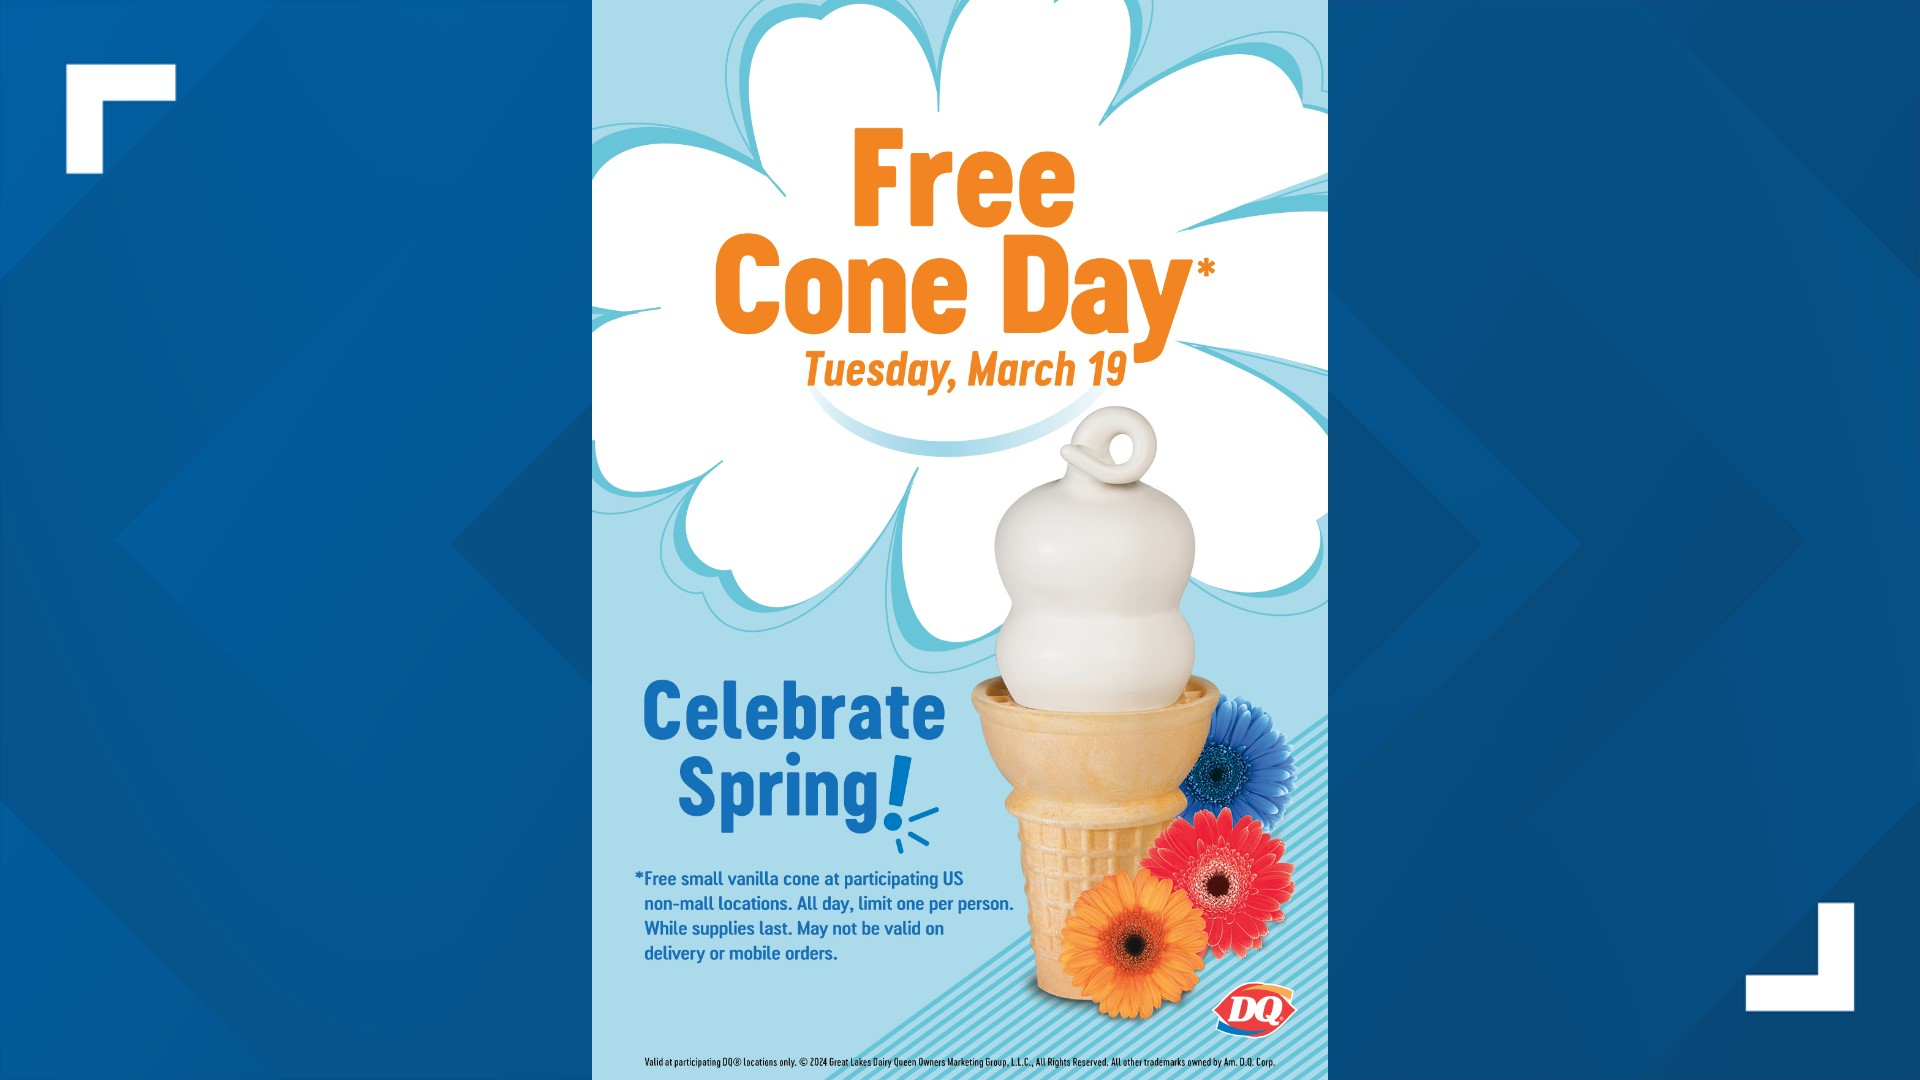 Dairy Queen is giving out free ice cream cones on March 19